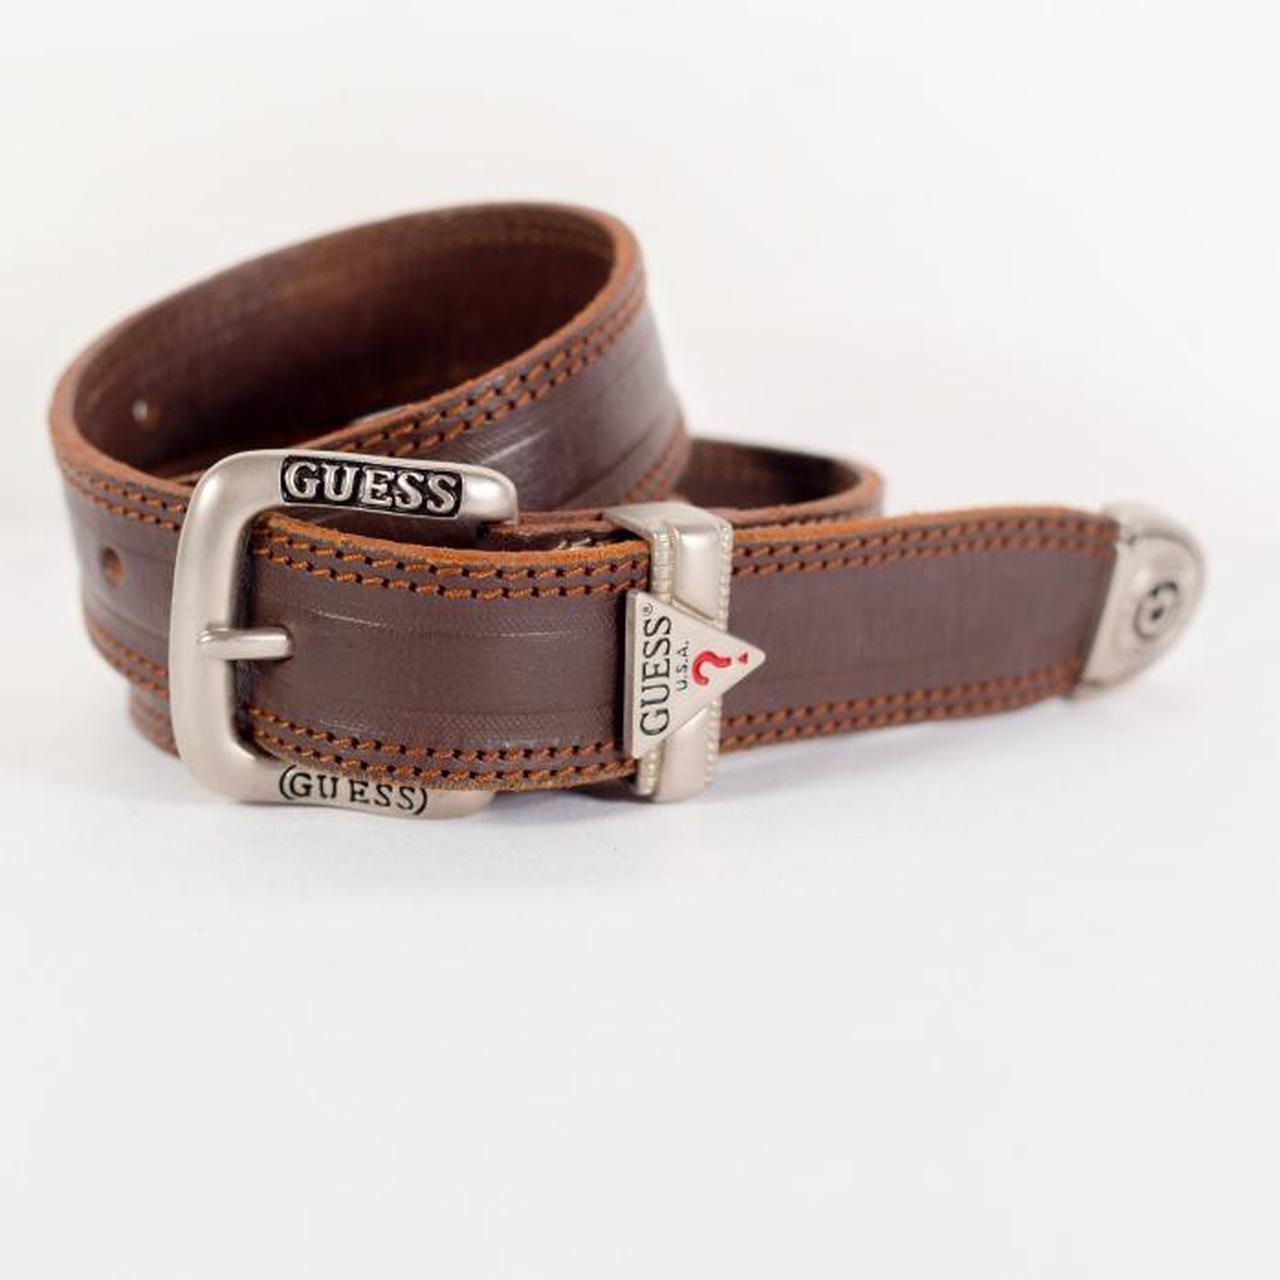 Product Image 2 - LEATHER GUESS BELT
2k Brown leather